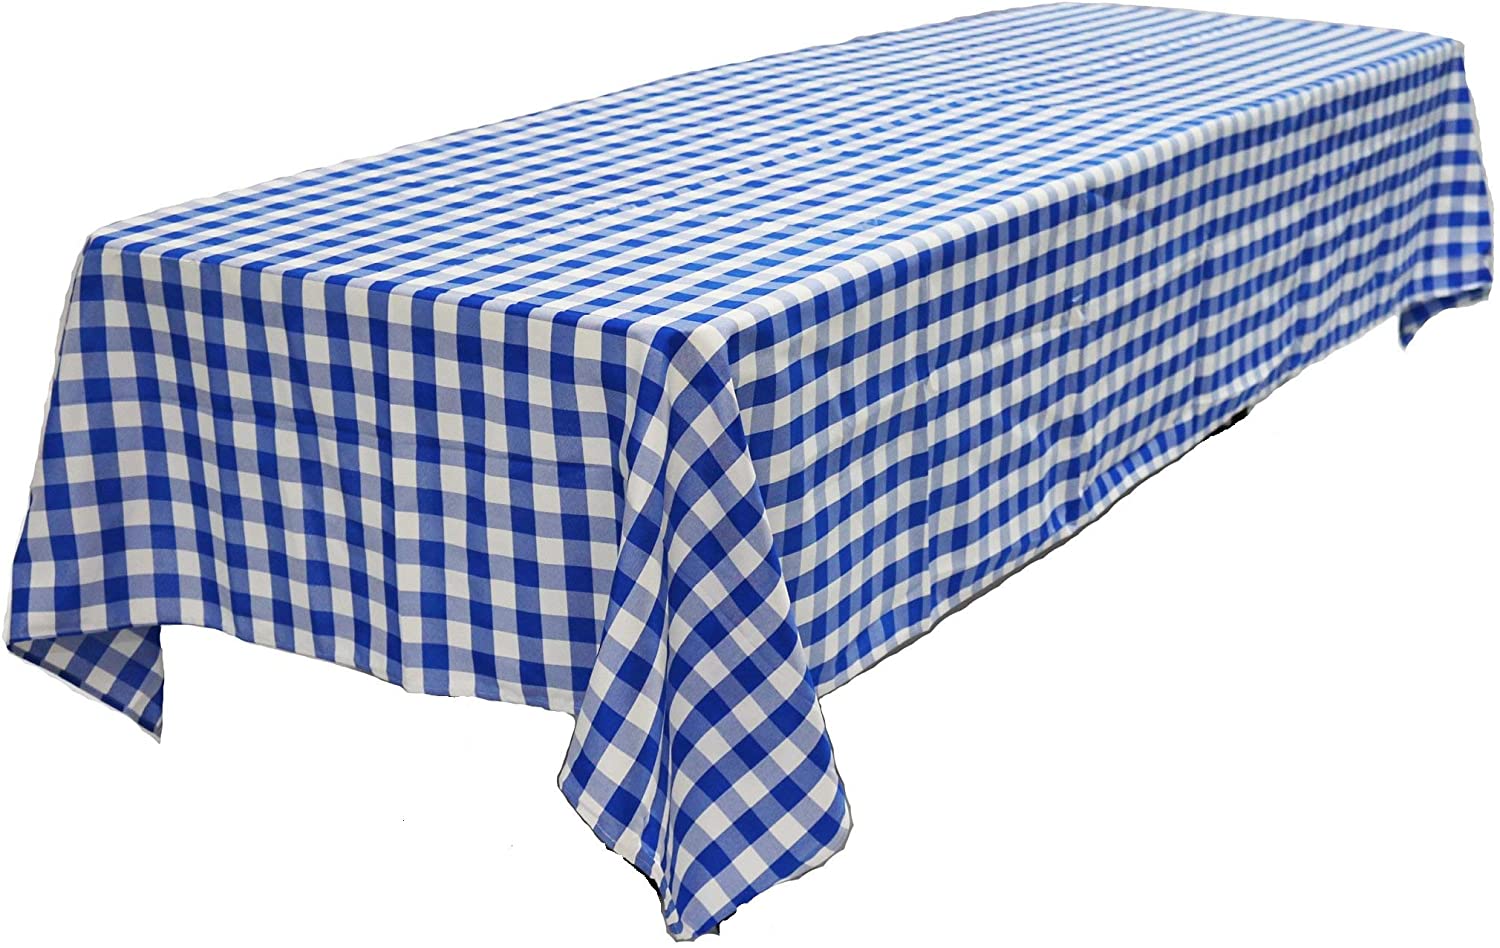 6 Pack Pack of 6 Plastic Blue and White Checkered Table covers Picnic Table Covers by Oojami 